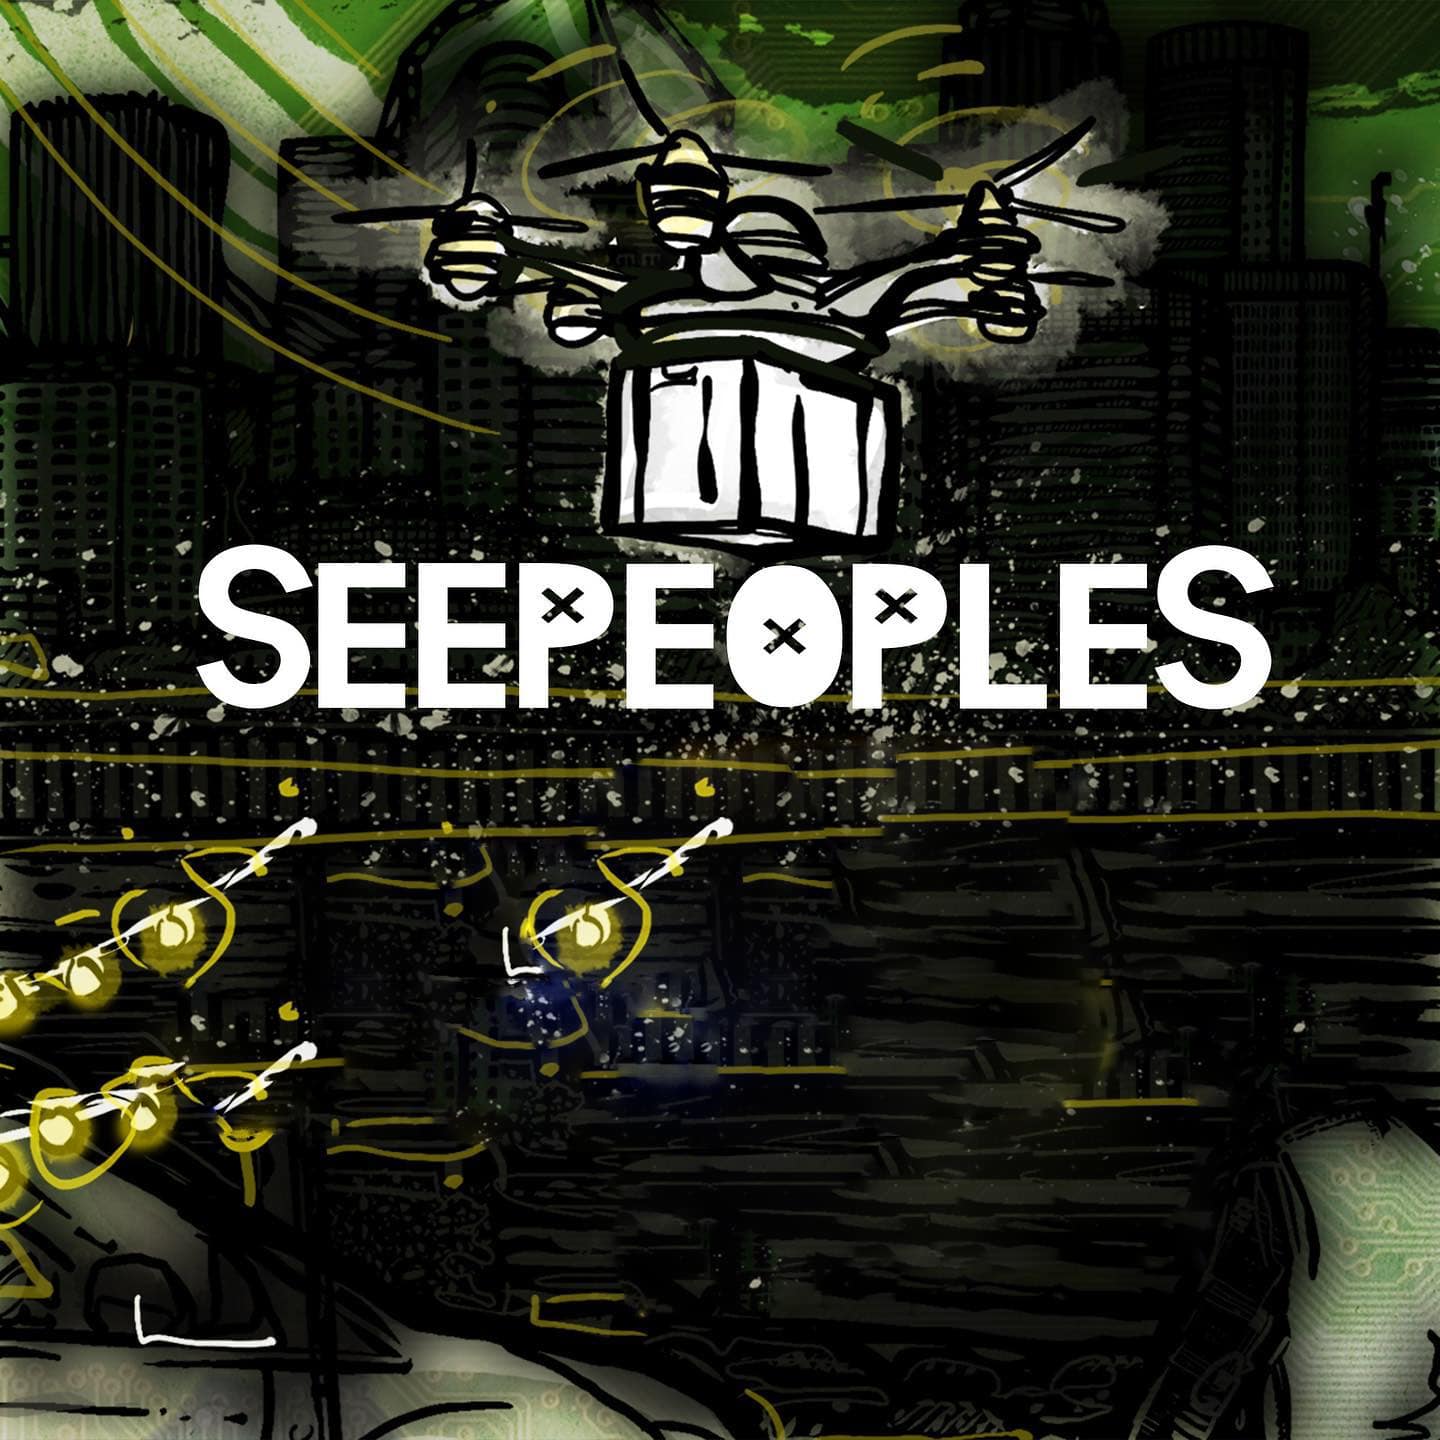 Seepeoples